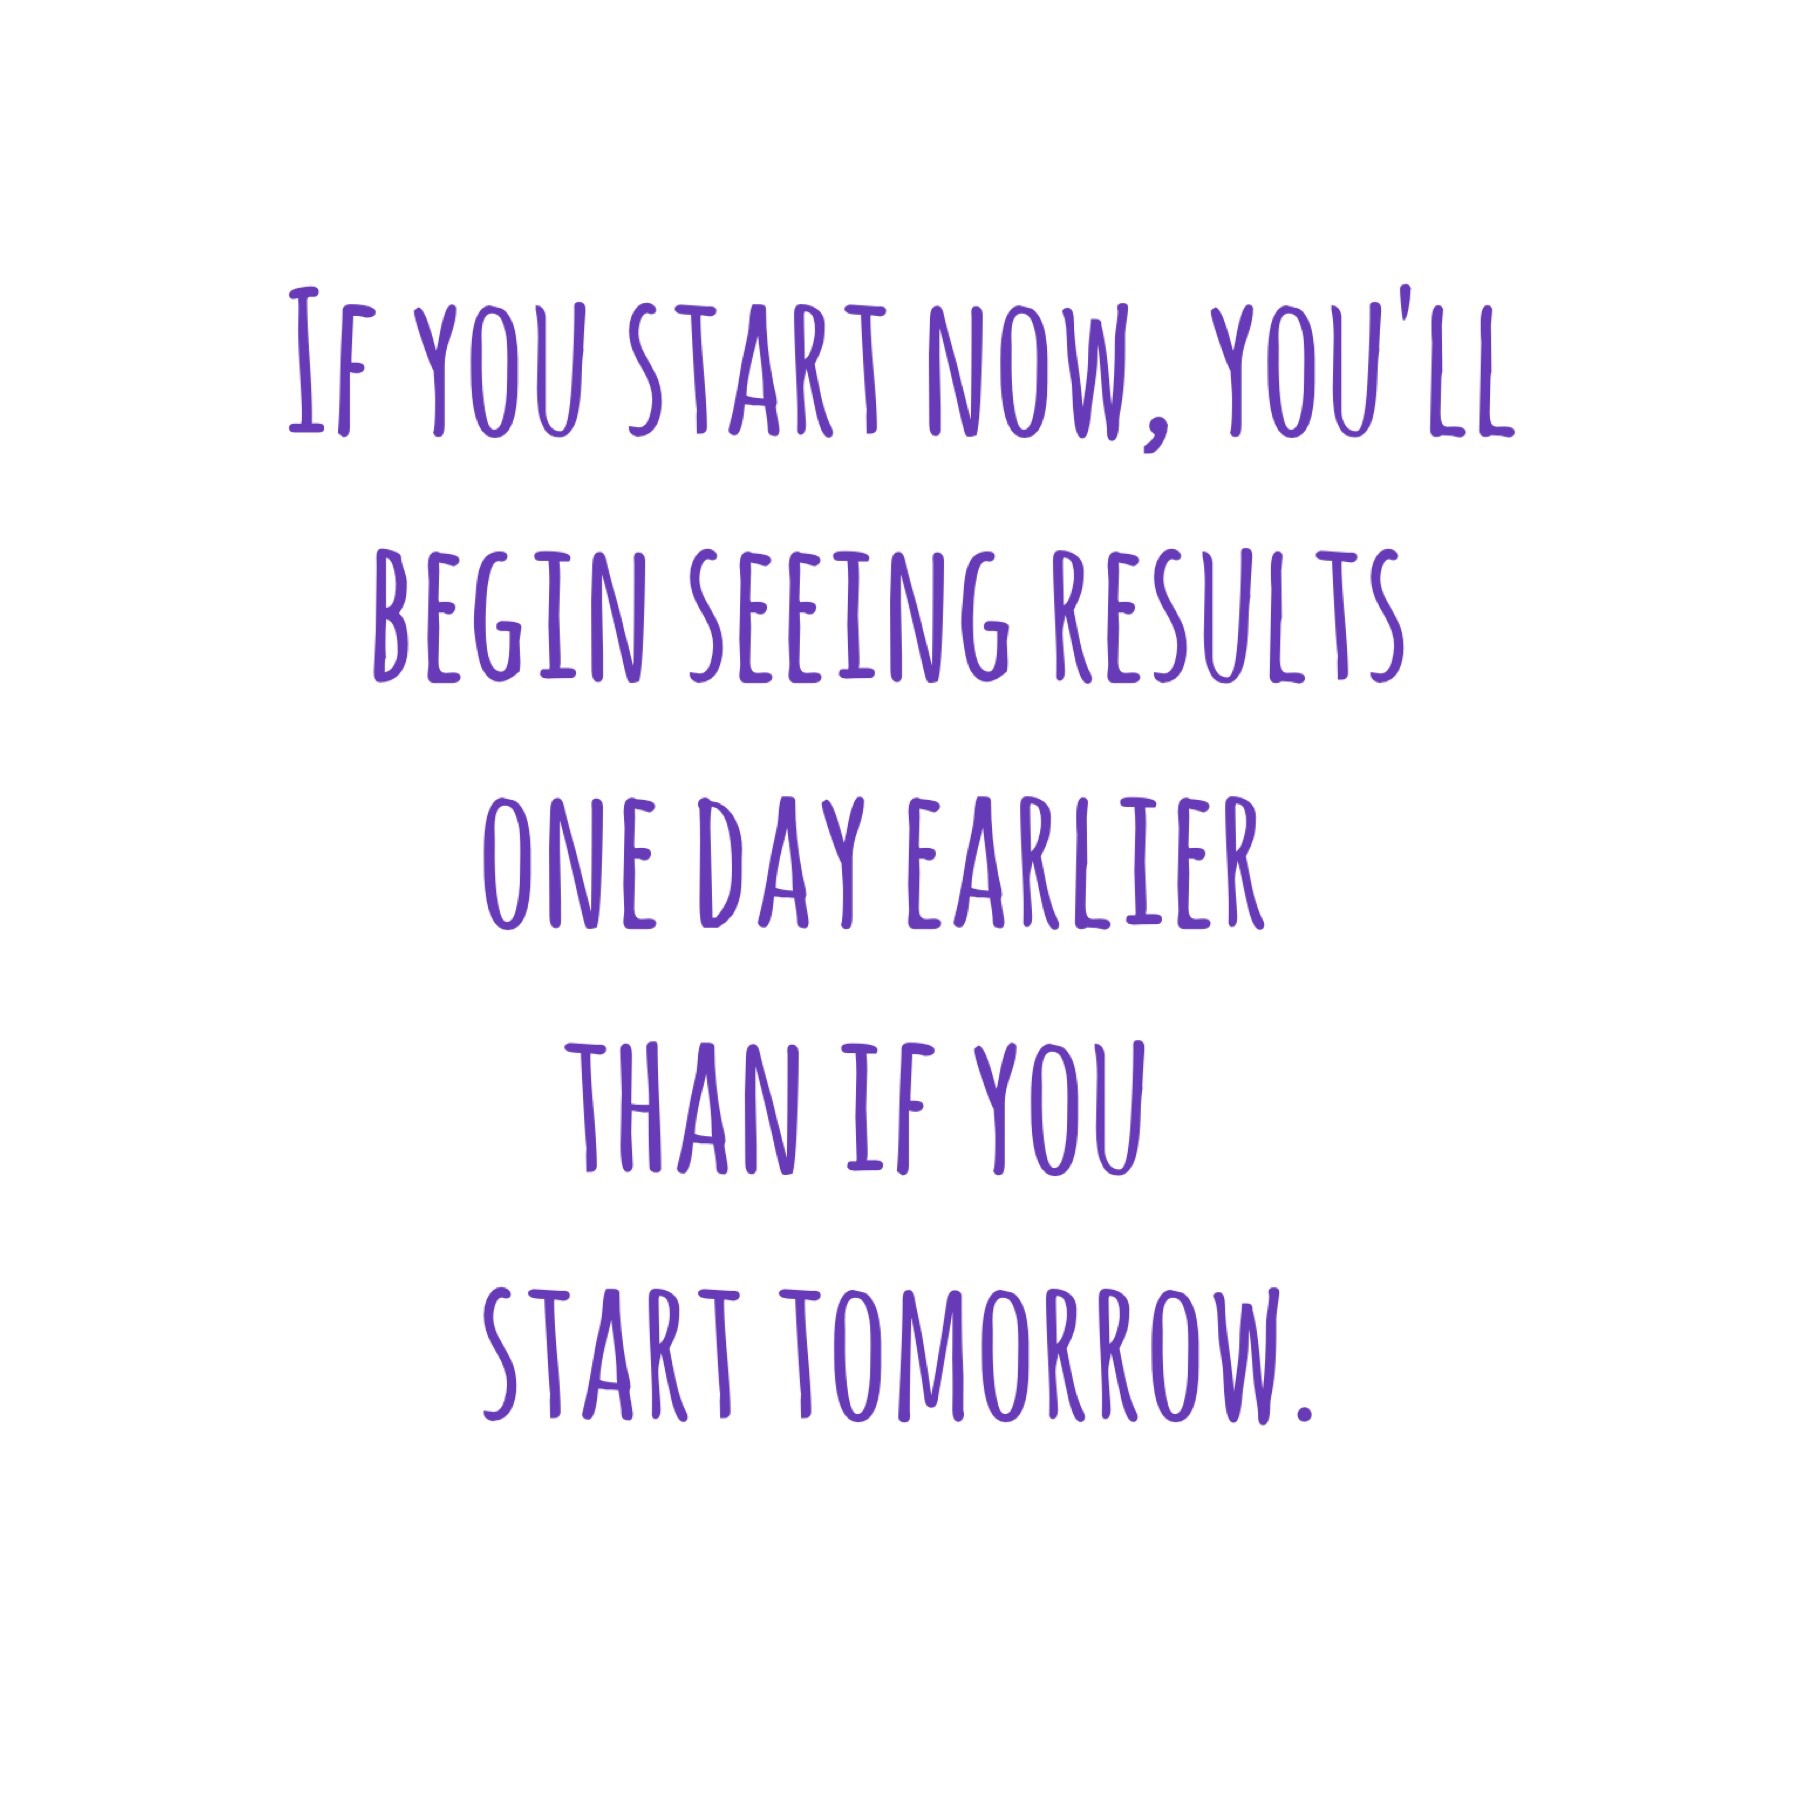 If you start now, you'll begin seeing results one day earlier than if you start tomorrow. Quote.